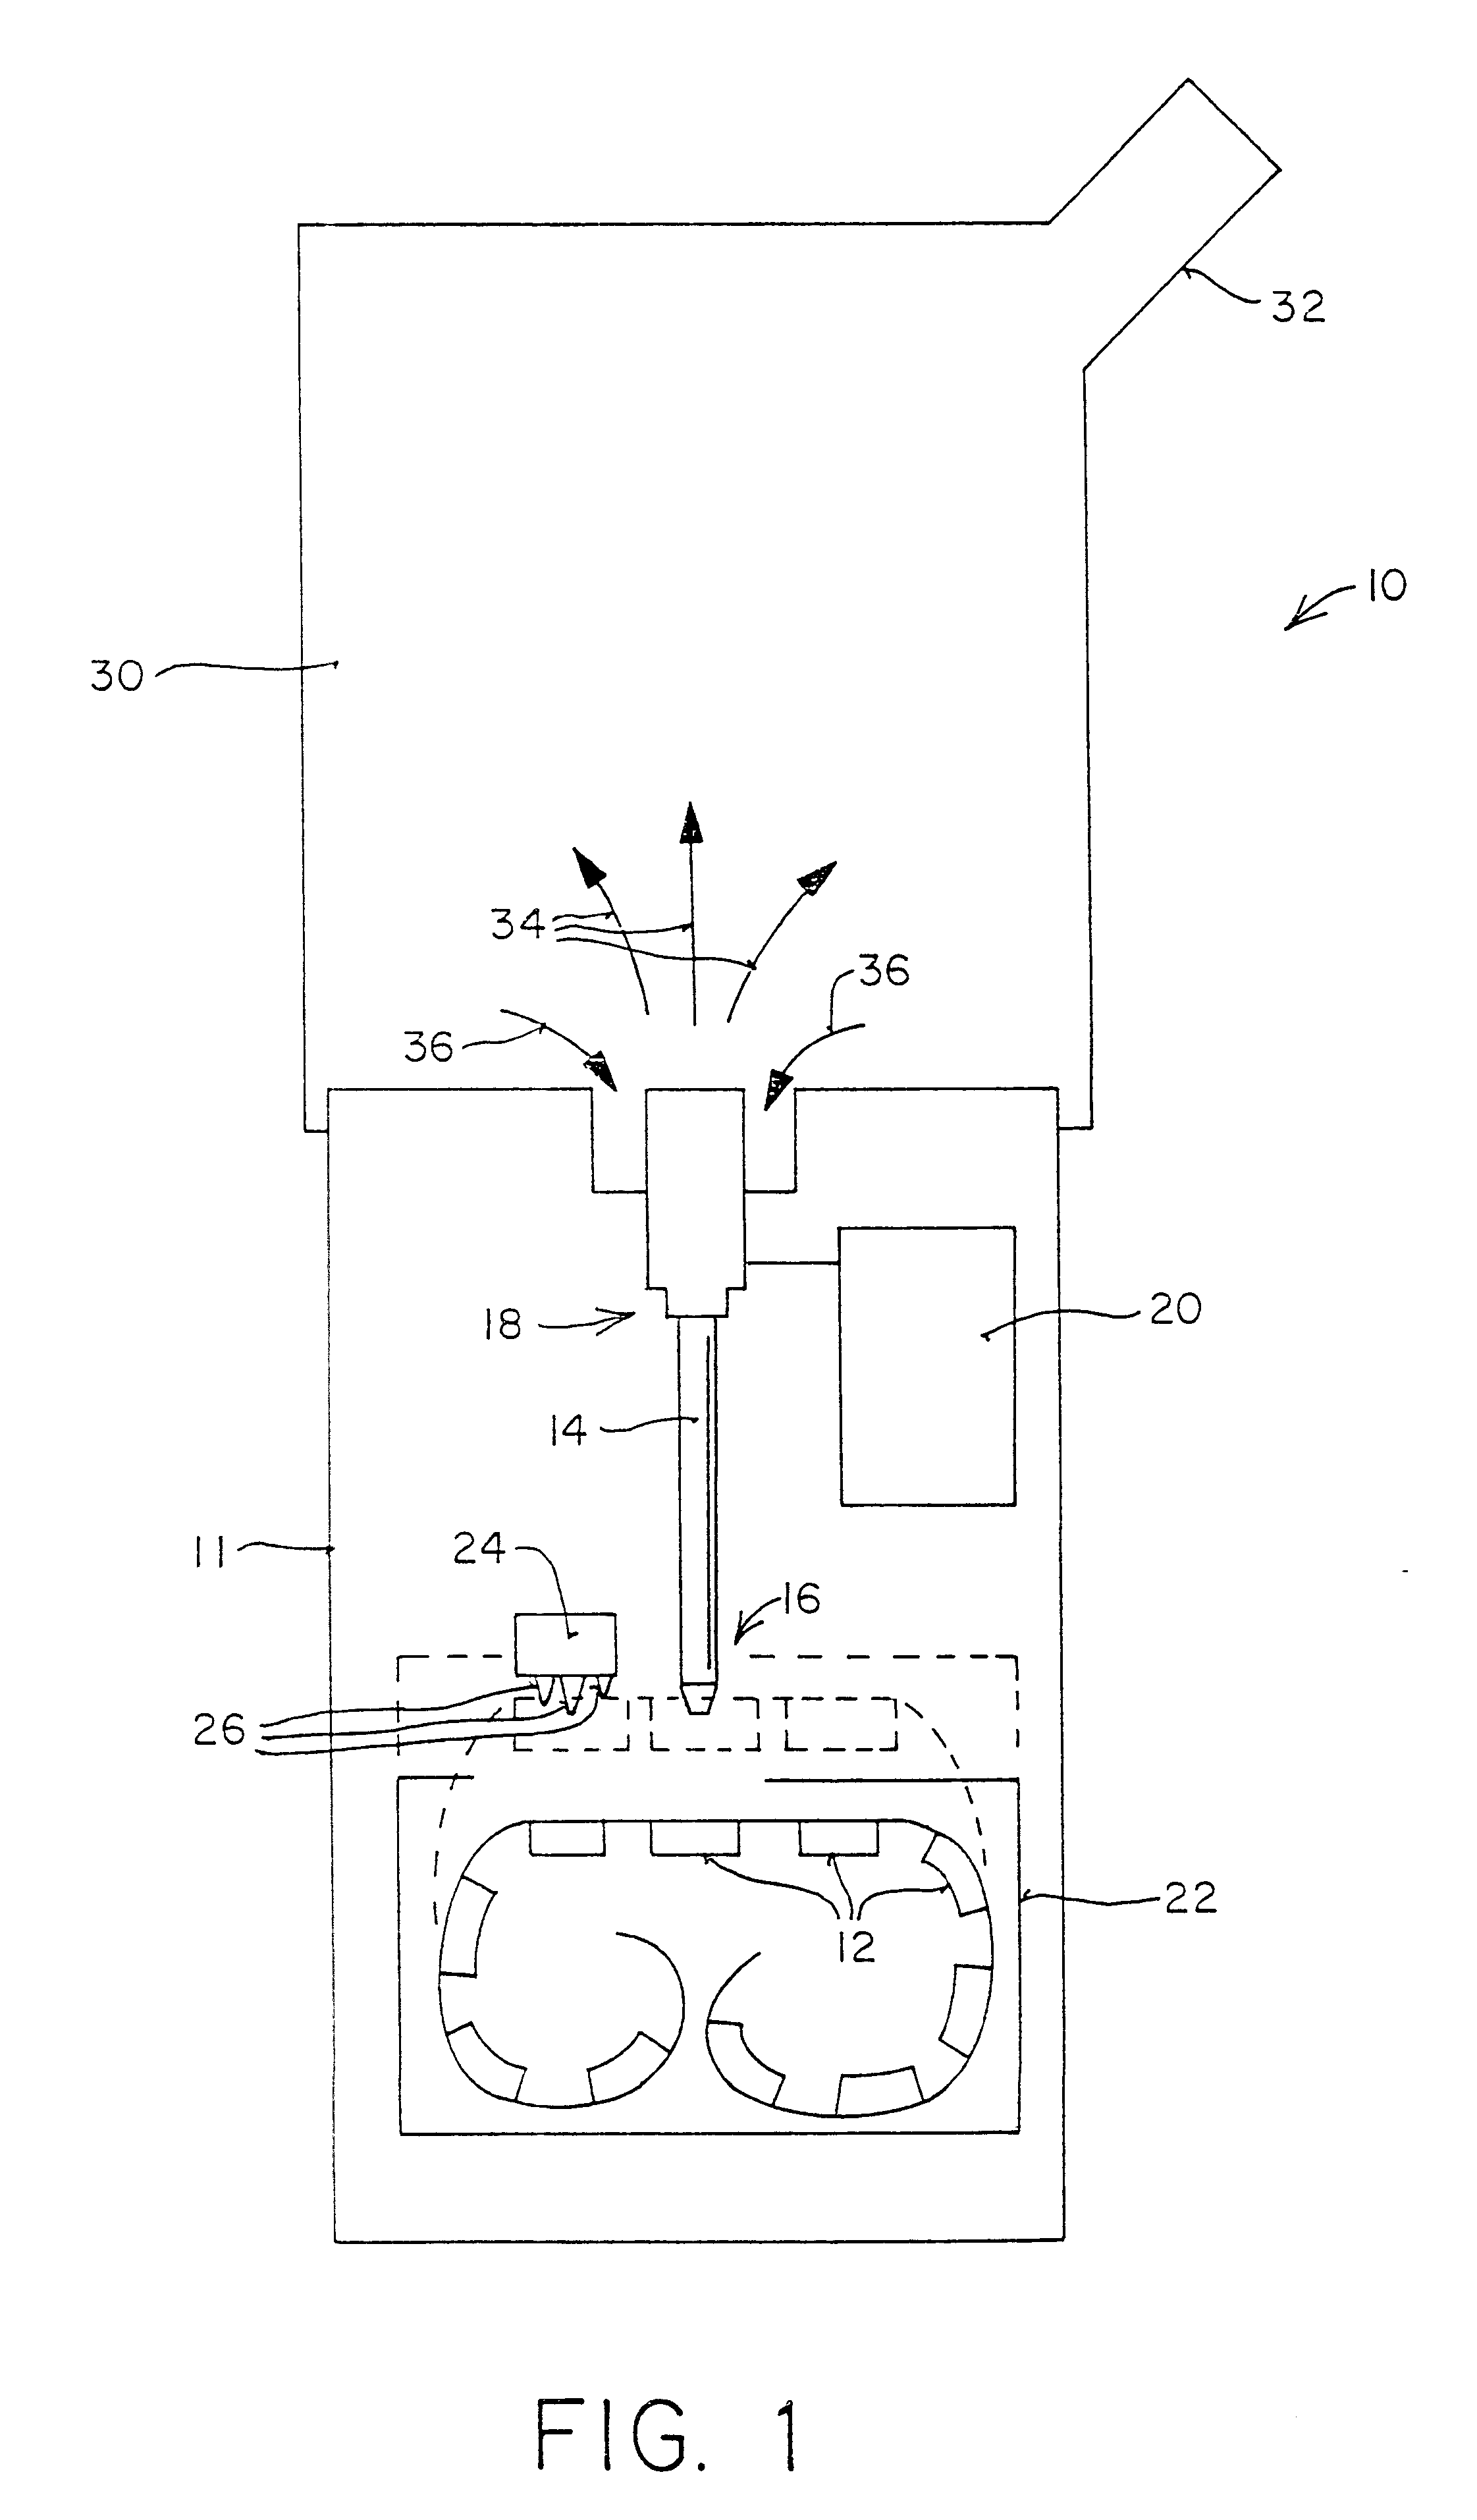 Apparatus and methods for dispersing dry powder medicaments